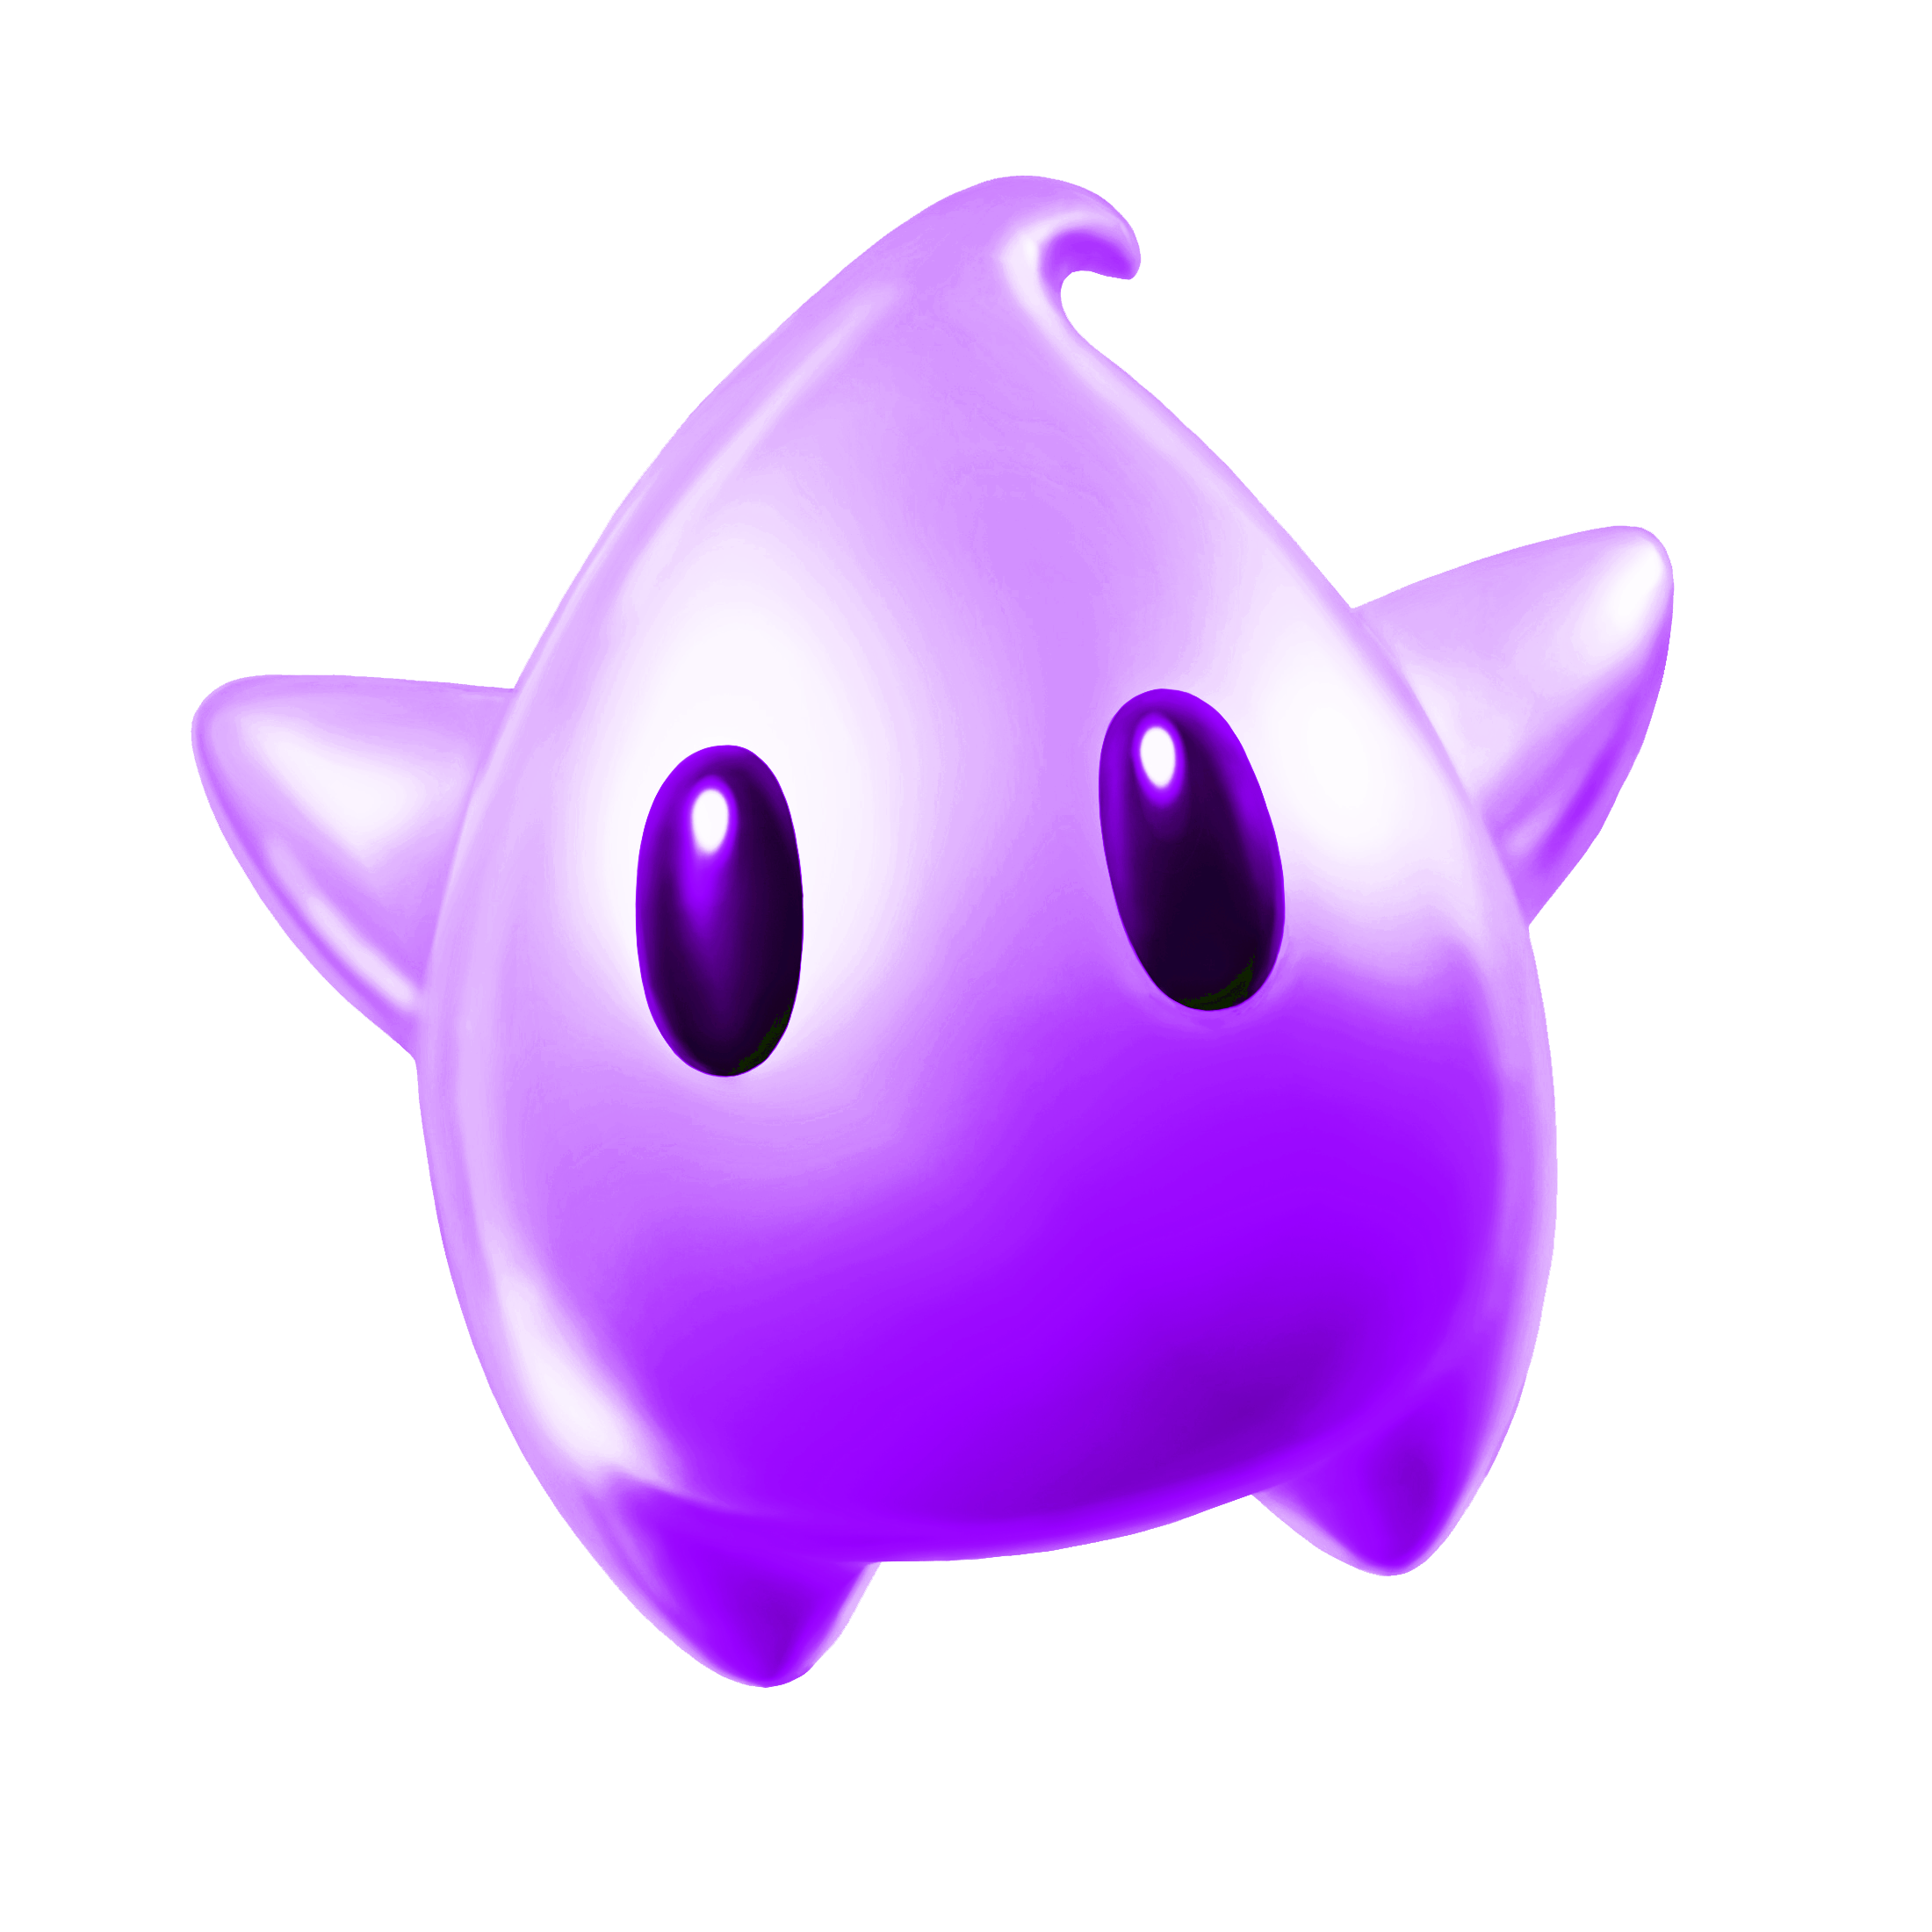 luma_recolor_by_skylight1989-d9esza5.png